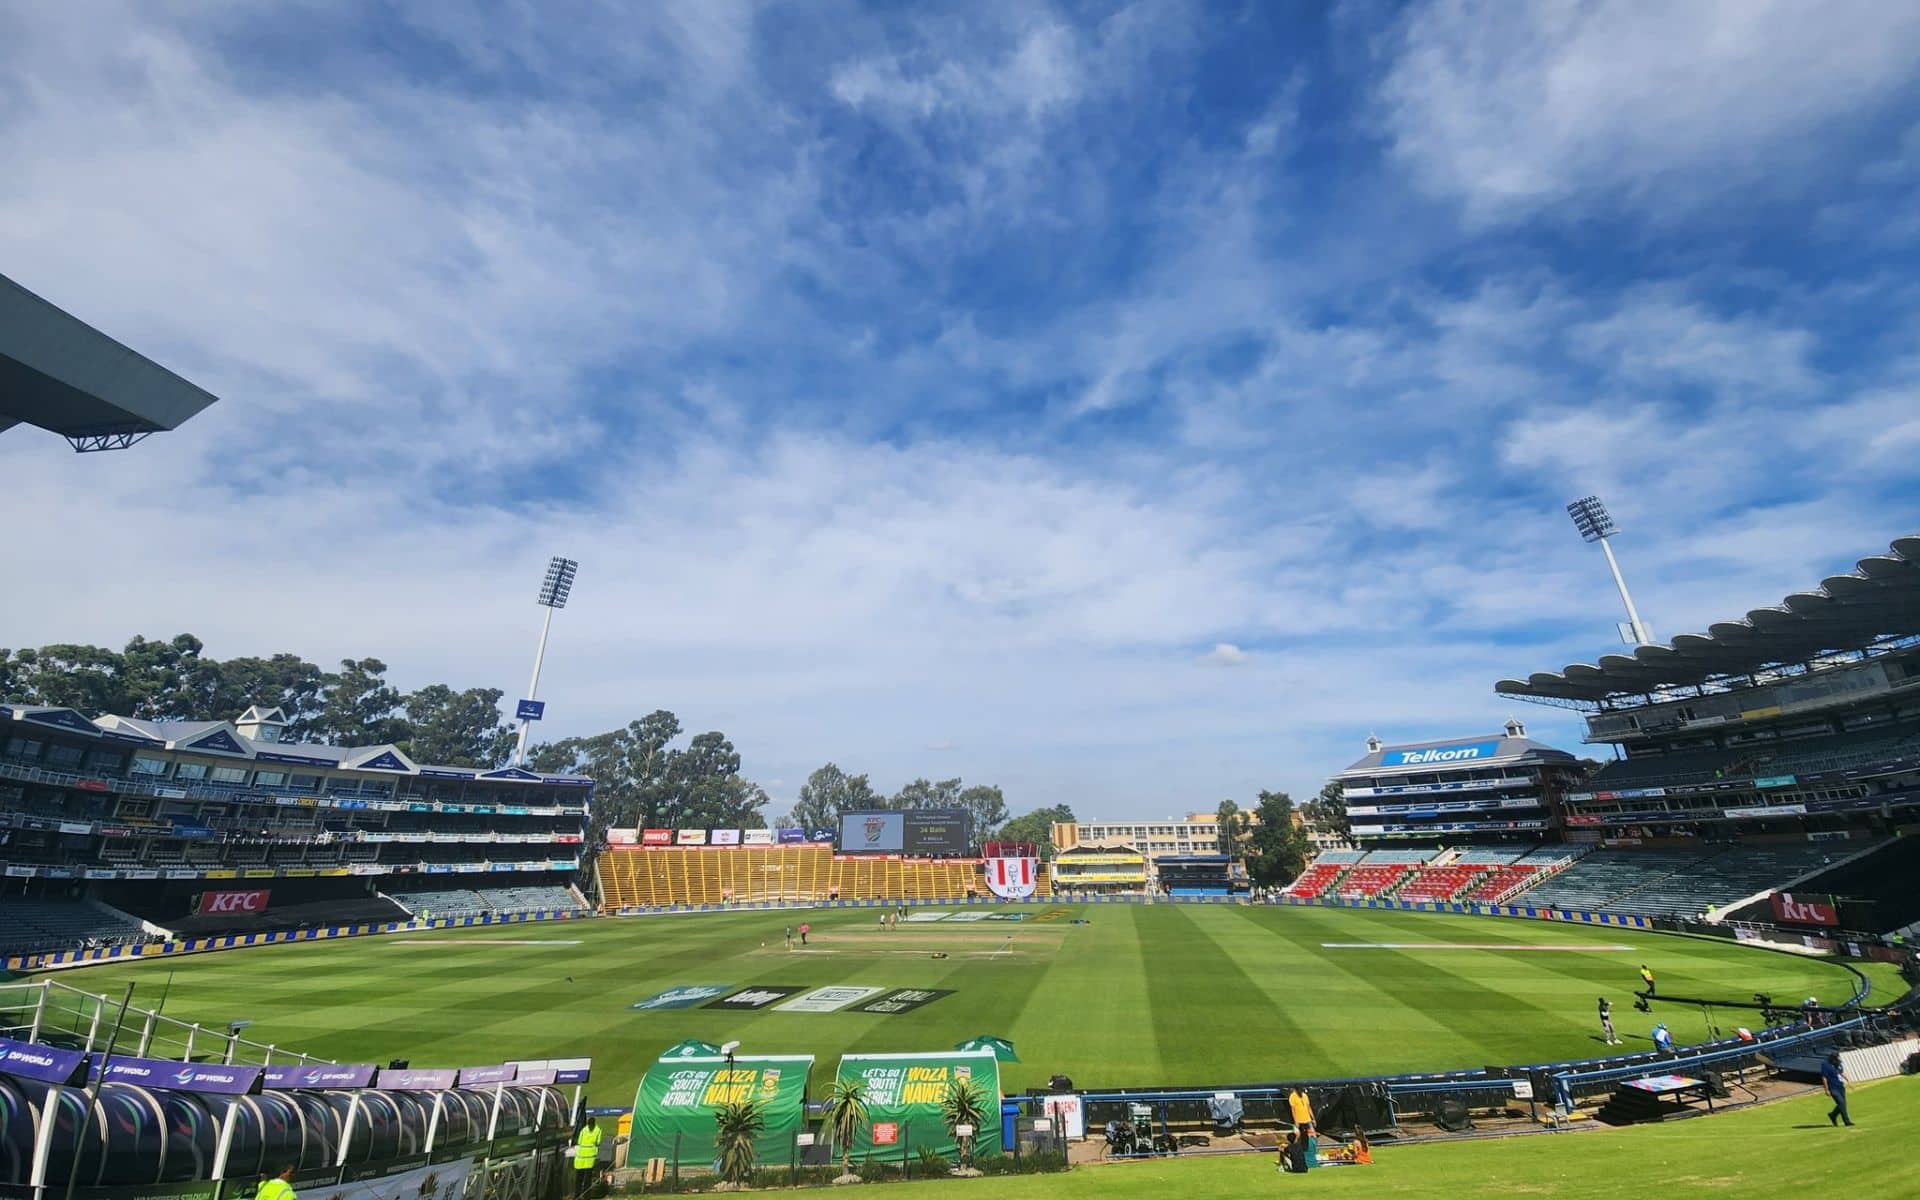 Wanderers Stadium in Johannesburg witnessed the first T20 World Cup final [X.com]